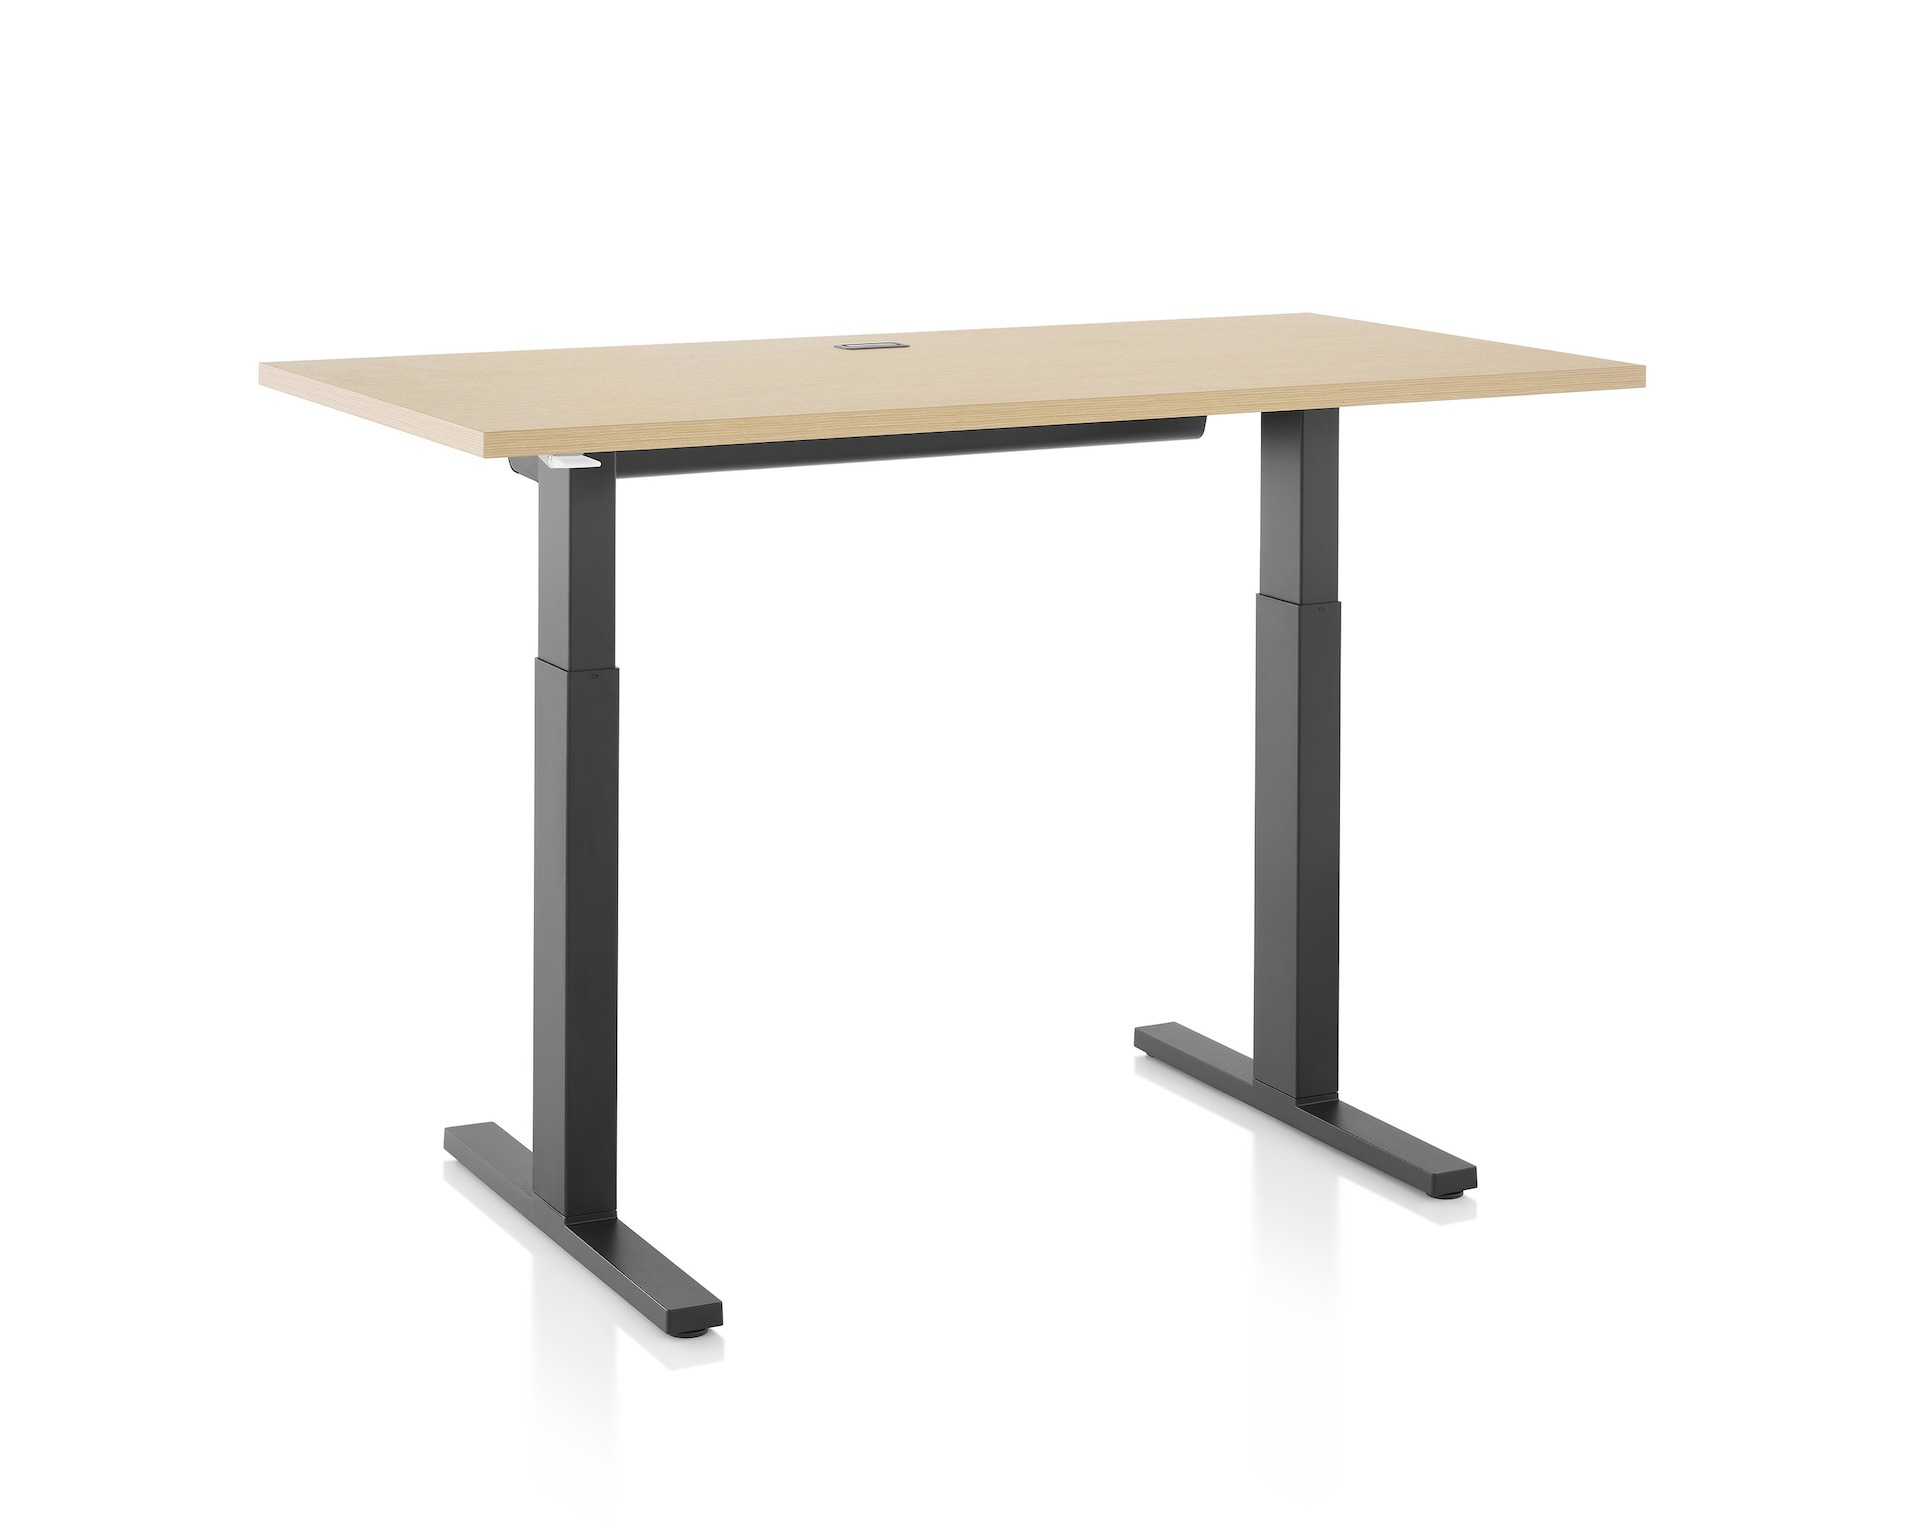 Brown and black Motia sit-to-stand table with cable trough, viewed at an angle. 